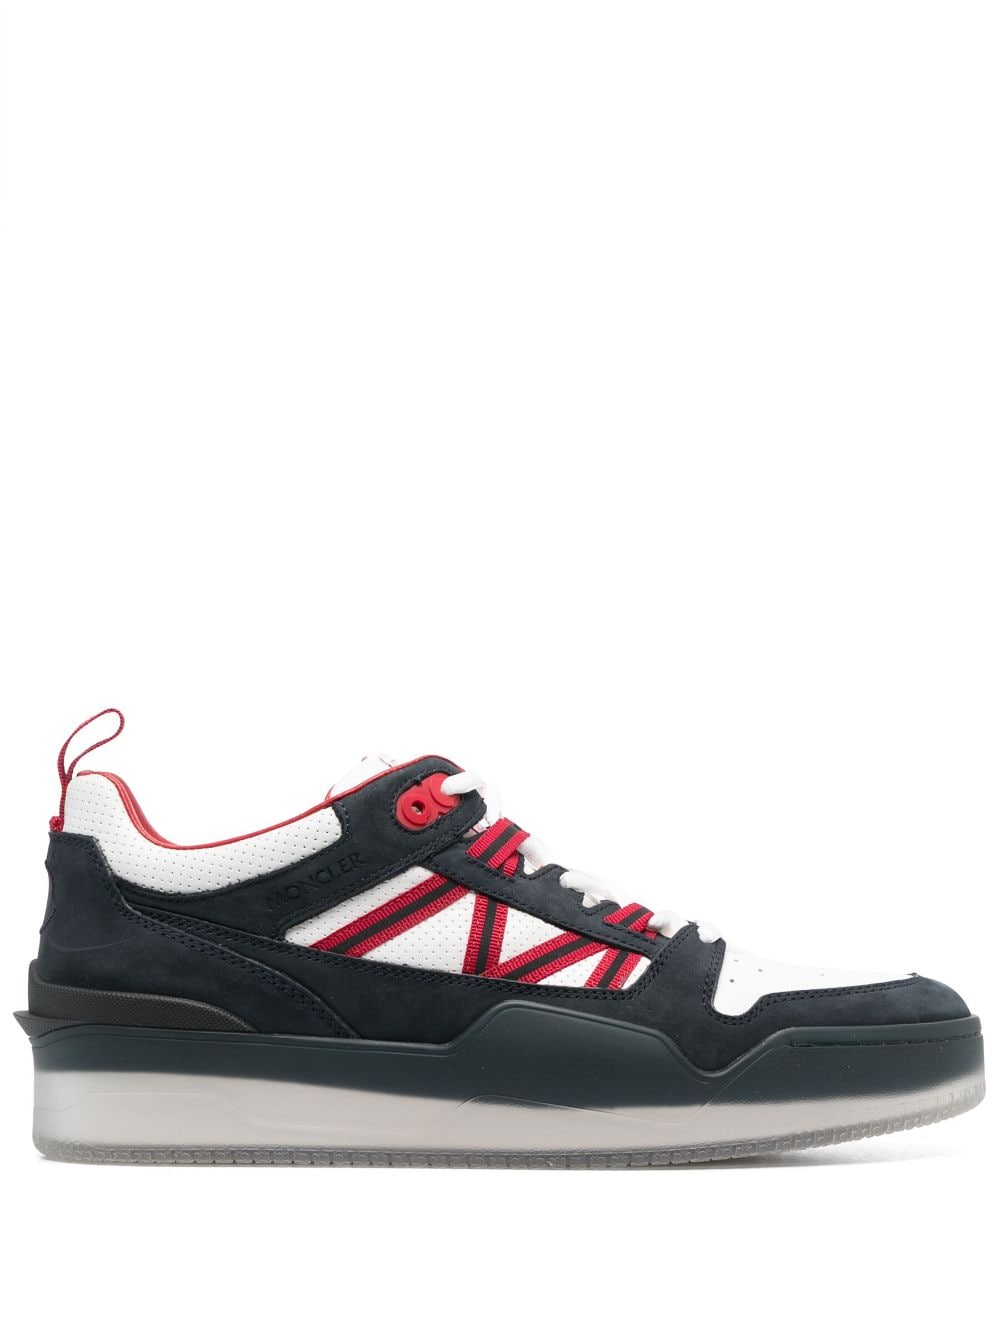 Image 1 of Moncler Pivot low-top sneakers